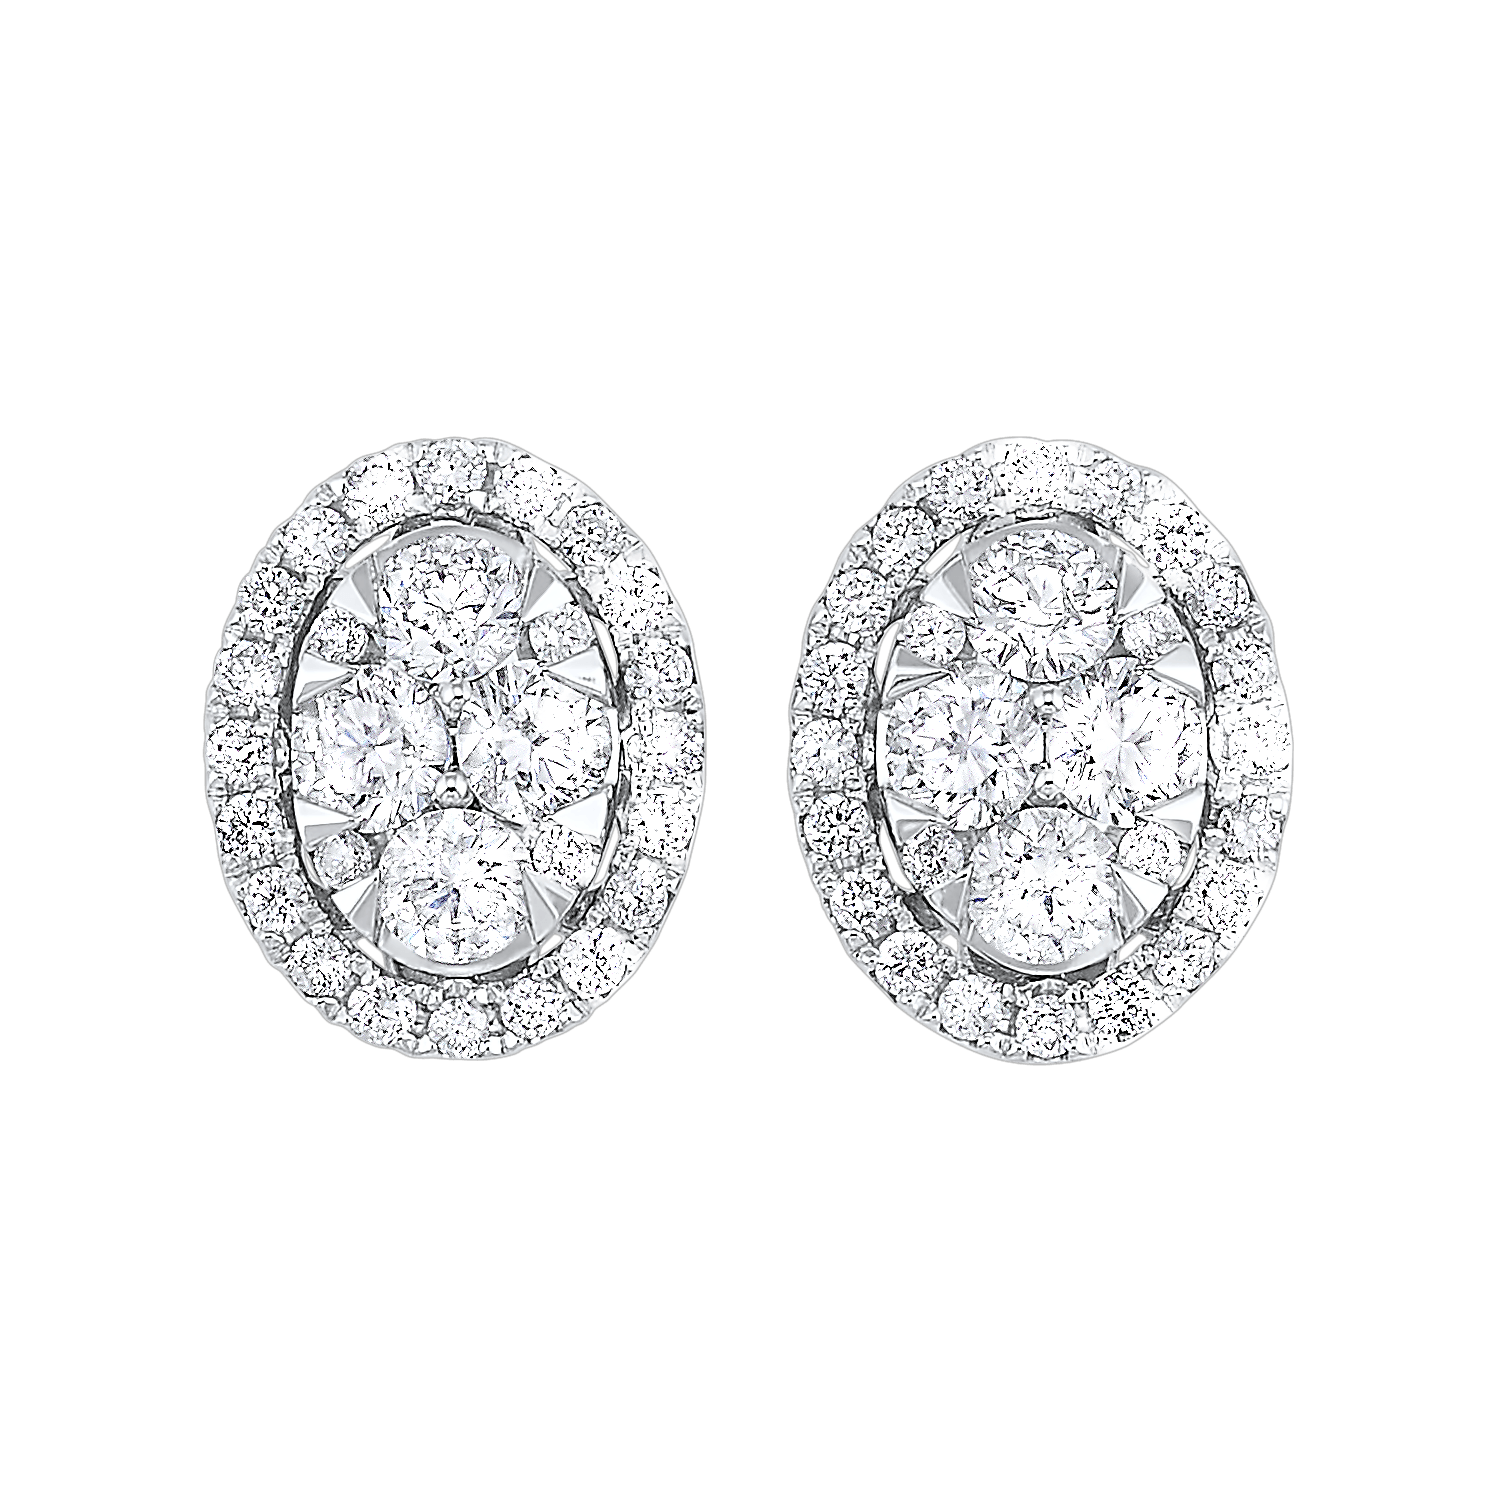 BW James Jewelers Earrings 16 Page Christmas Catalog Offer 14KTW Uno Round Basics Earrings 1/2 Ctw